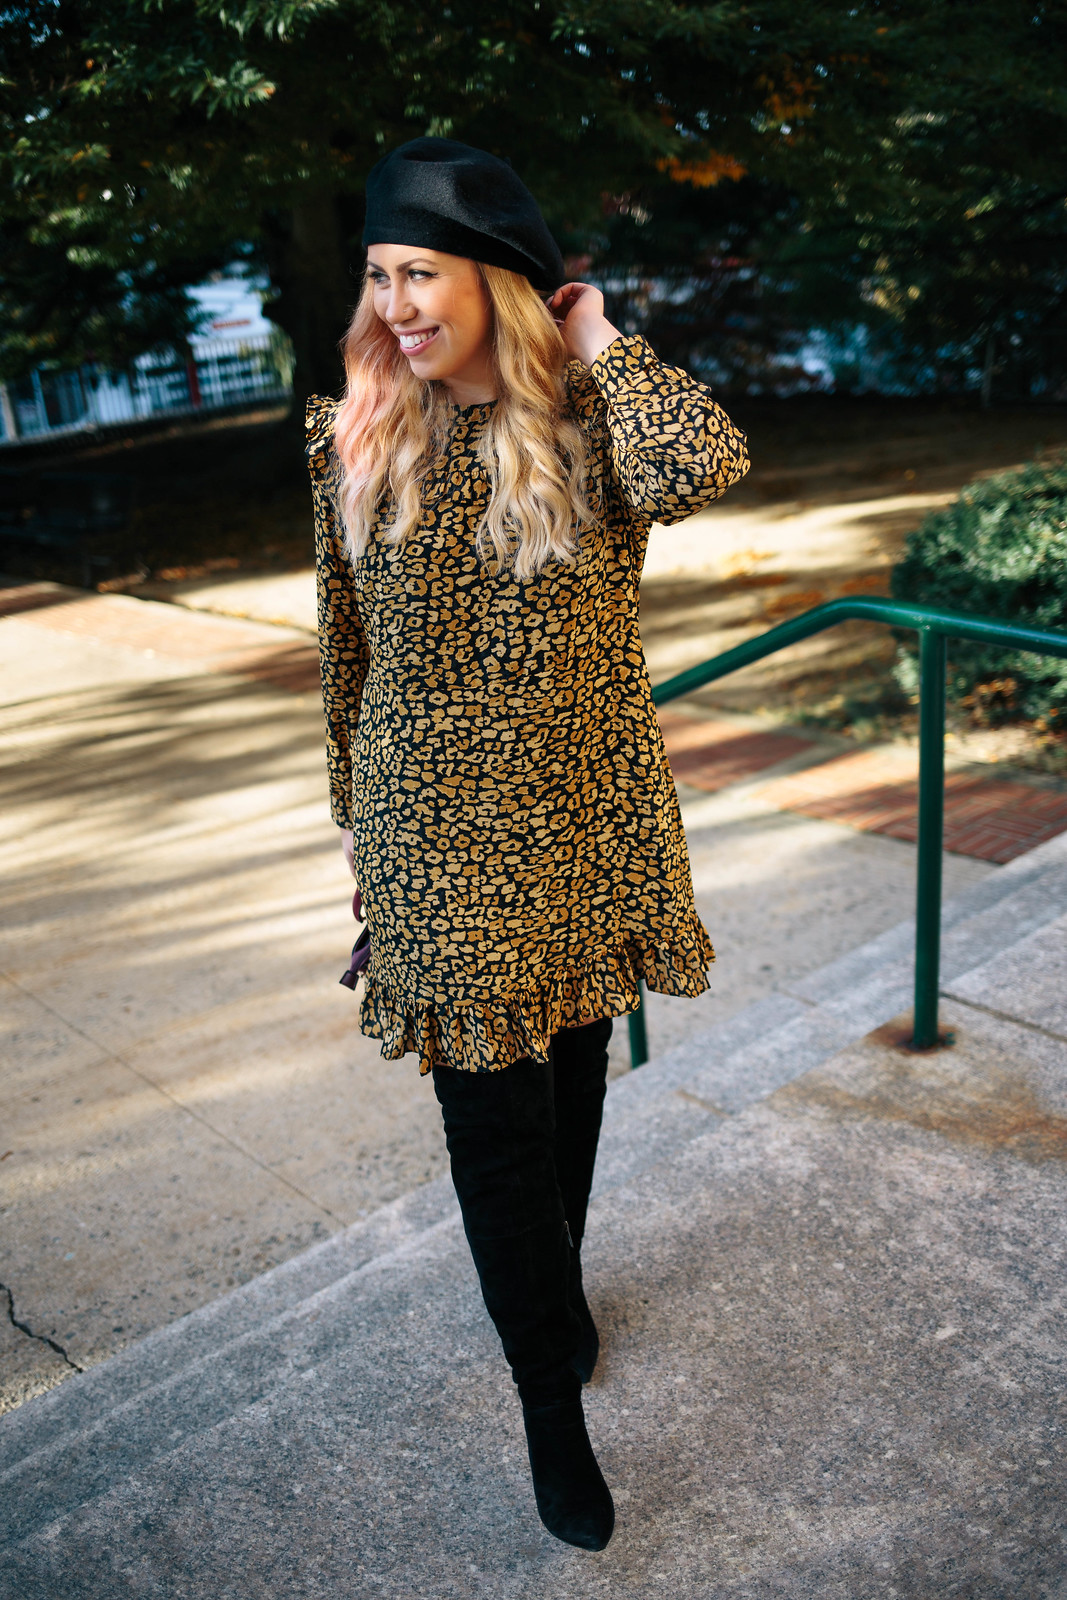 Jackie Giardina blogger wearing Fall Fashion Cheetah Dress and Black Suede Over the Knee Boots